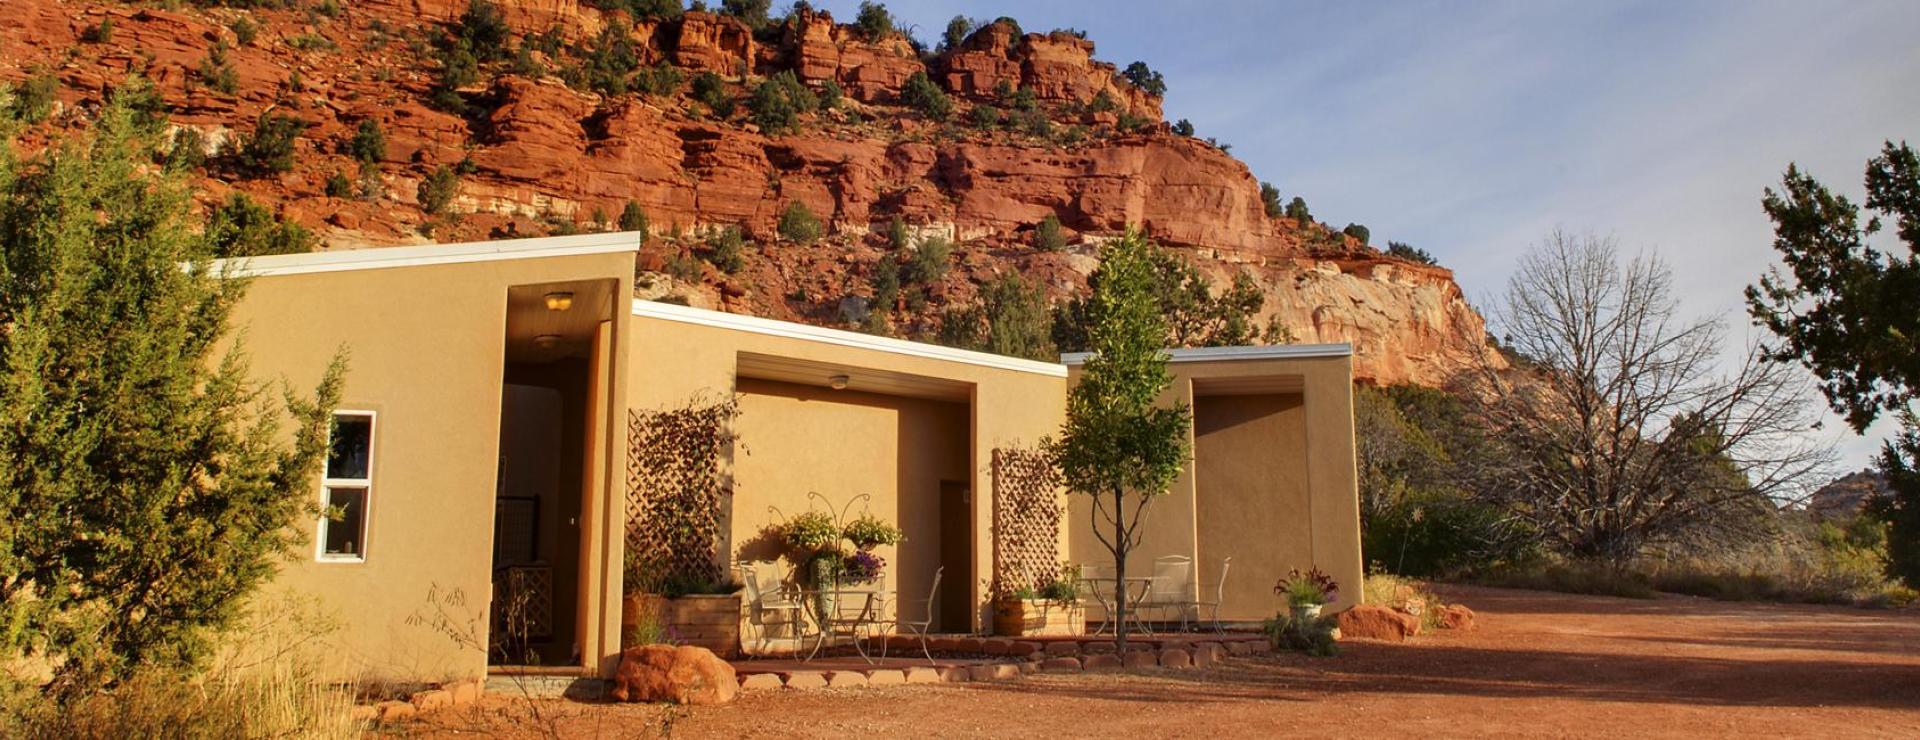 Small tan building in the desert with a backdrop of red rock cliffs and blue sky